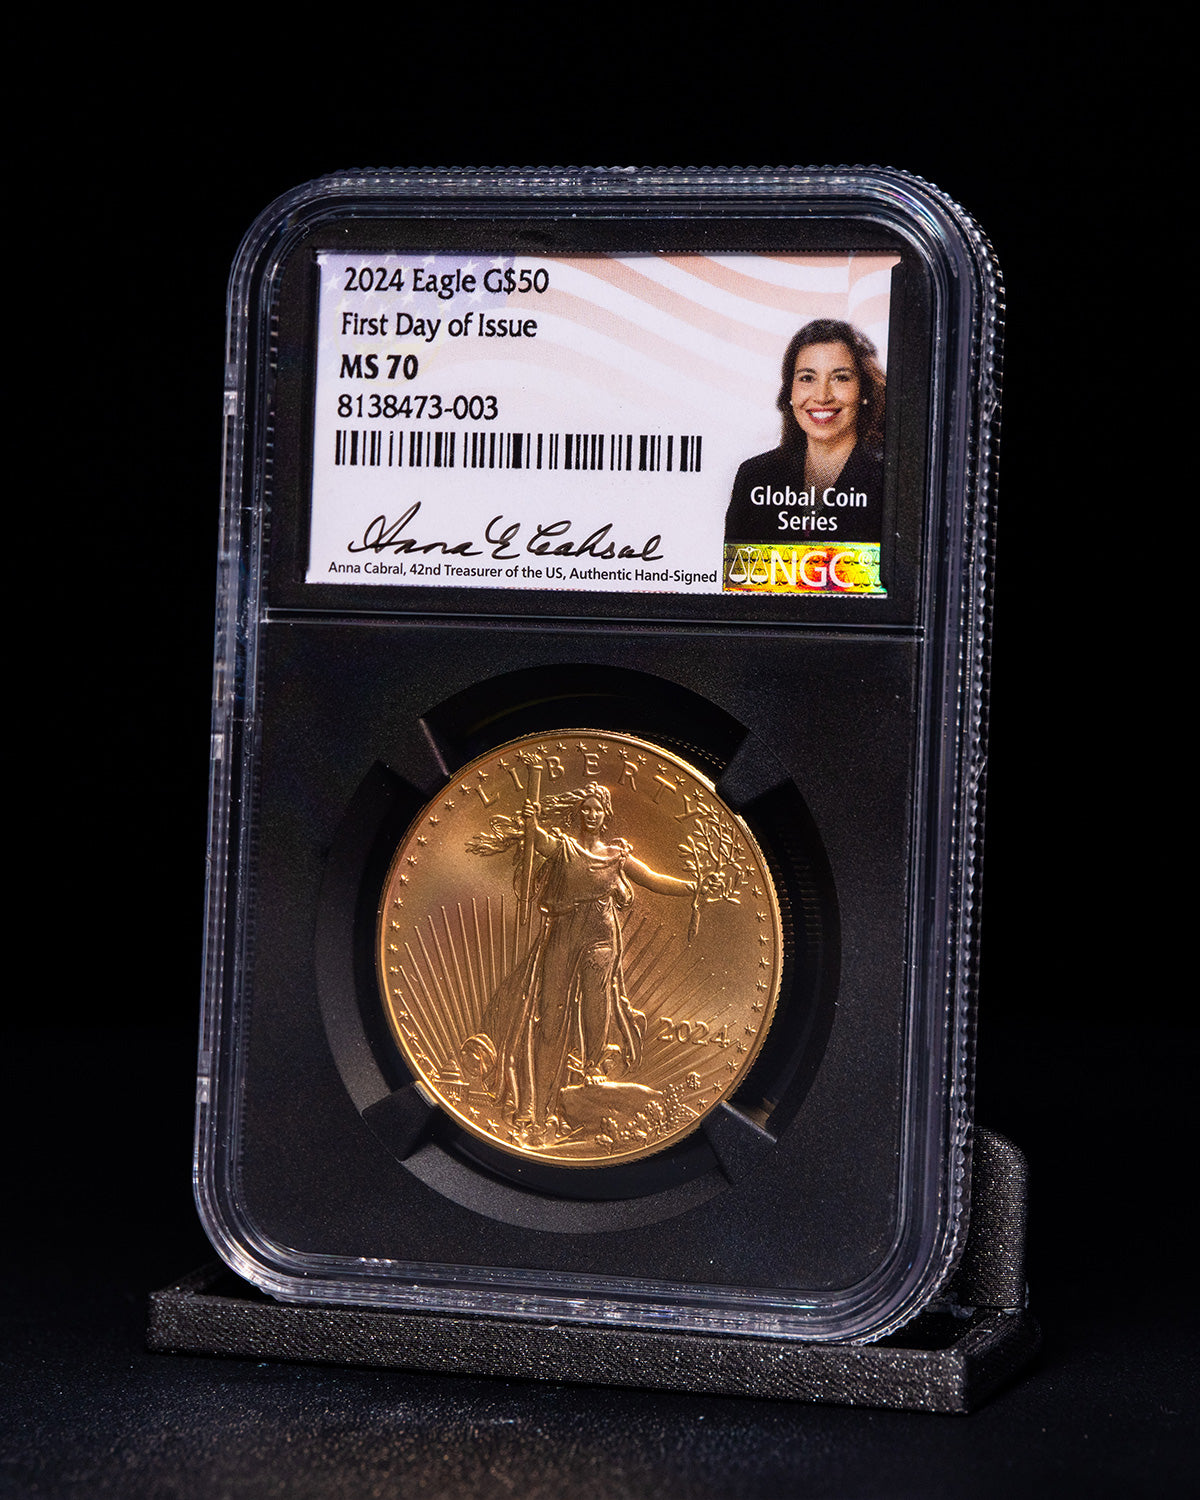 2024 $50 Gold Eagle | First Day of Issue Global Coin Series NGC MS70 | Anna Cabral Autographed